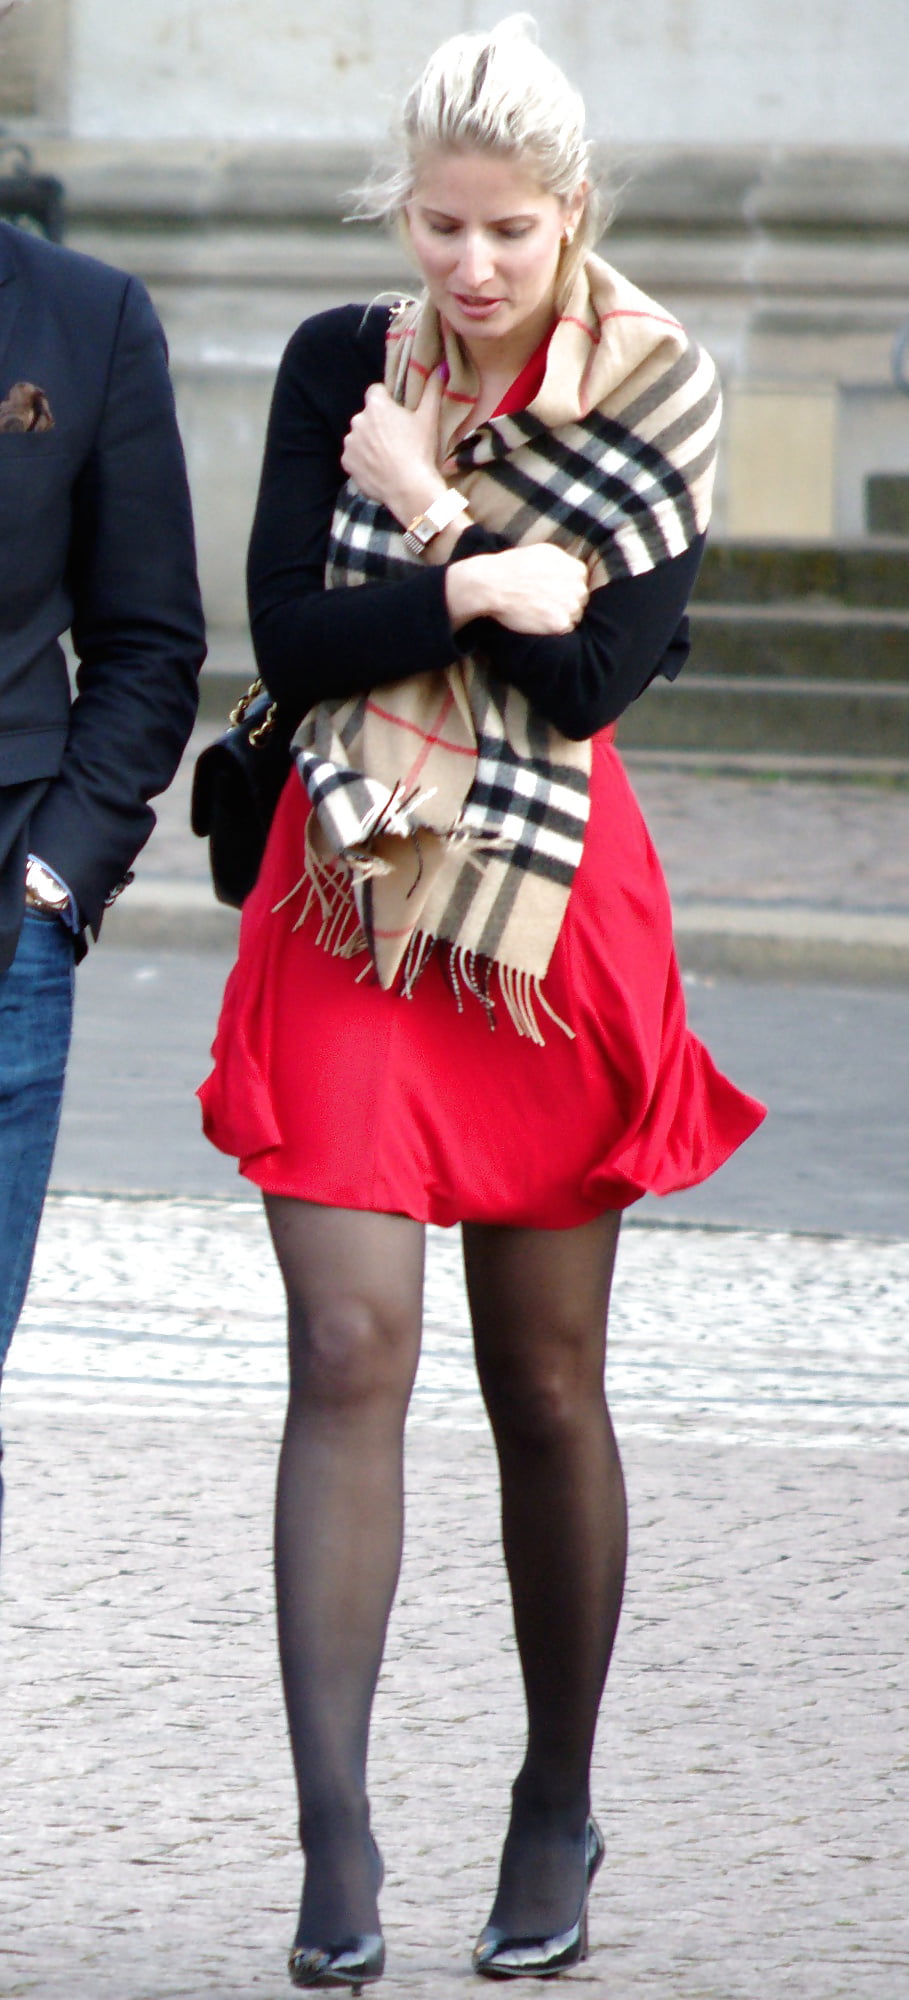 Candid Street Pantyhose -Tights #013 adult photos